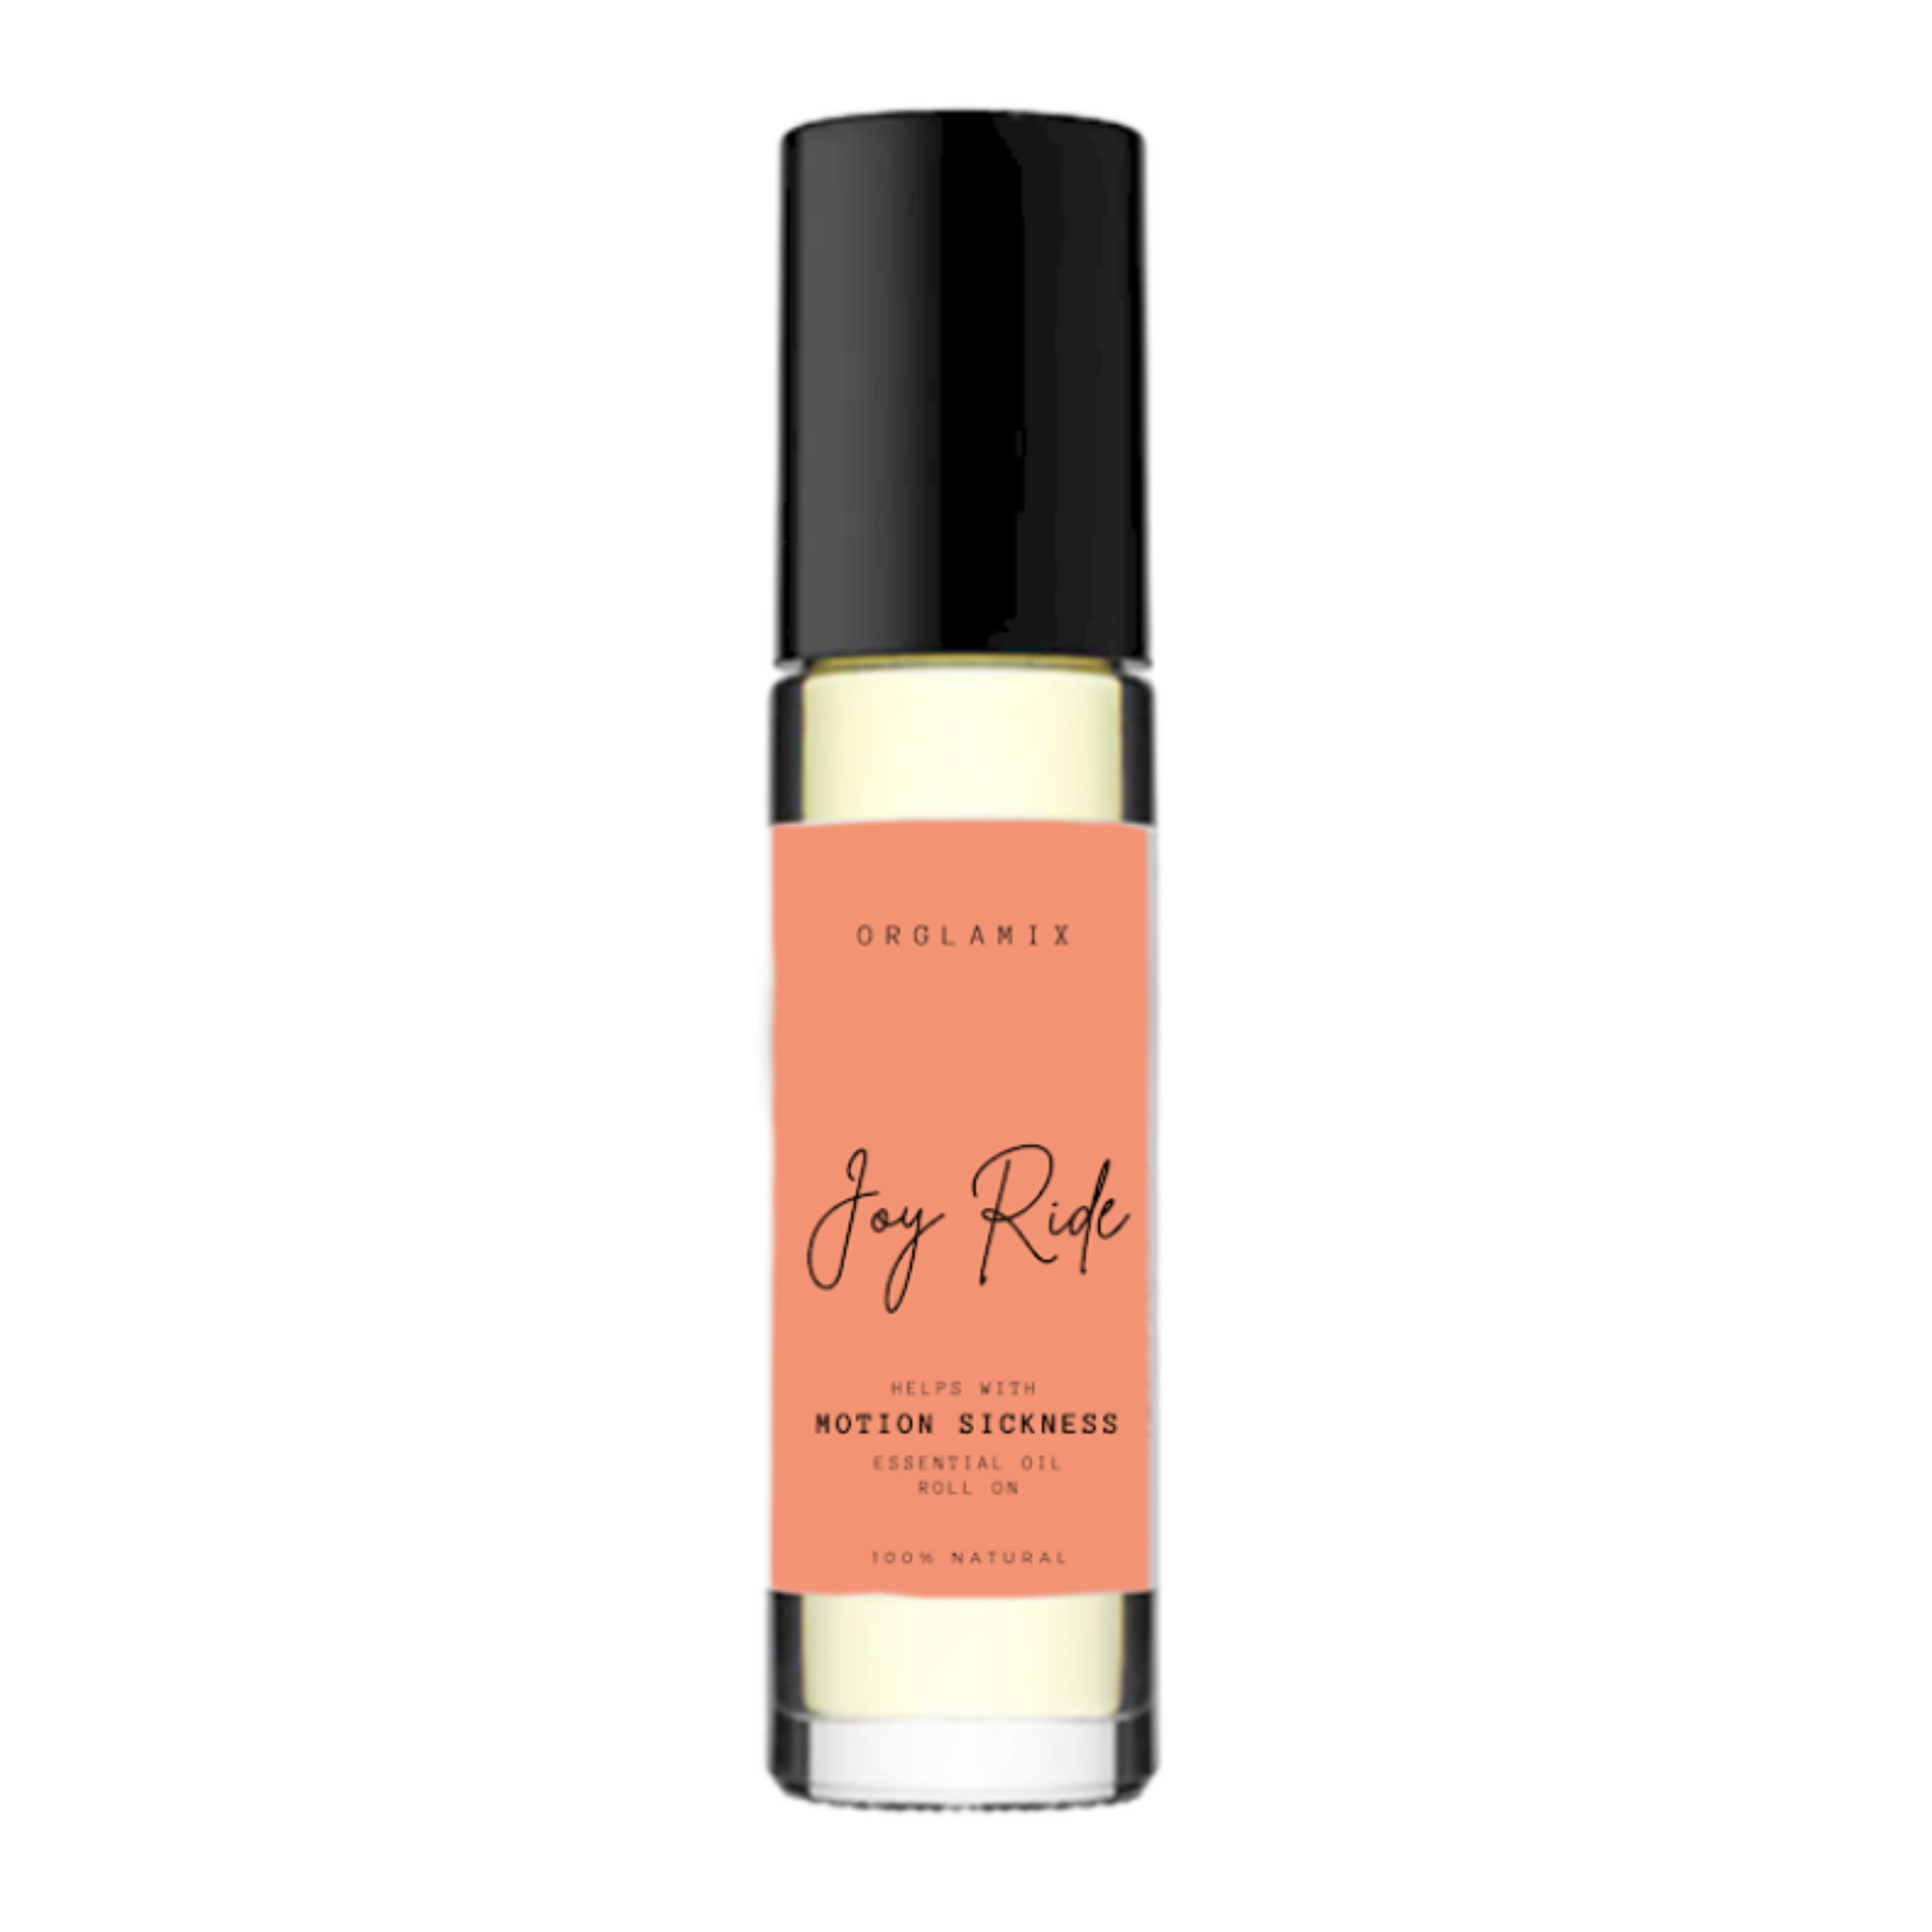 Joy Ride Essential Oil Roll-On For Motion Sickness  Orglamix